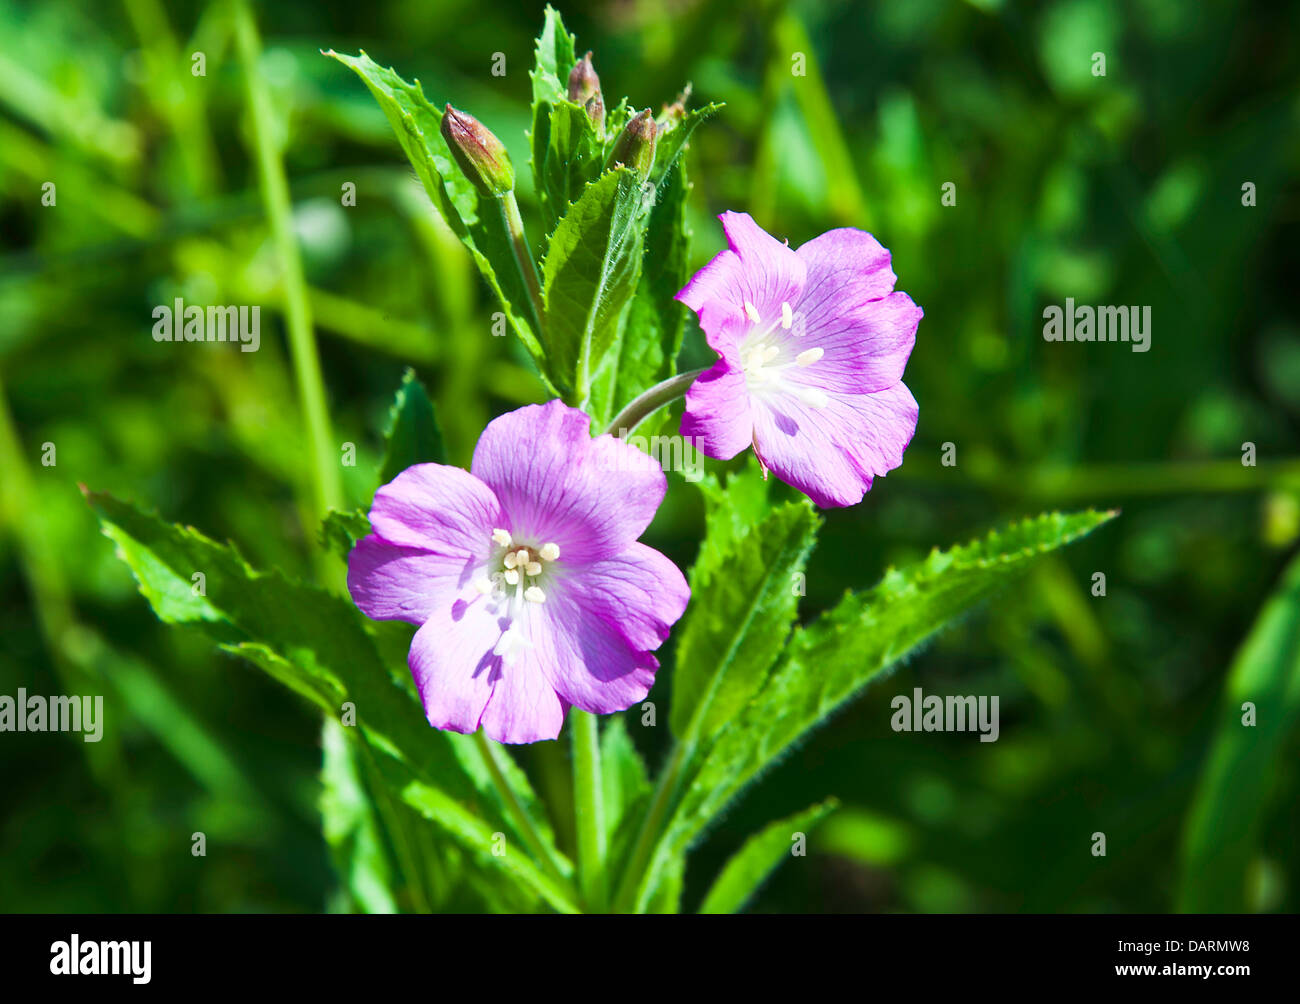 Pinky purple Great Wiilowherb Flowers in Bloom by Towpath Trent and Mersey Canal Rode Heath Cheshire England United Kingdom UK Stock Photo